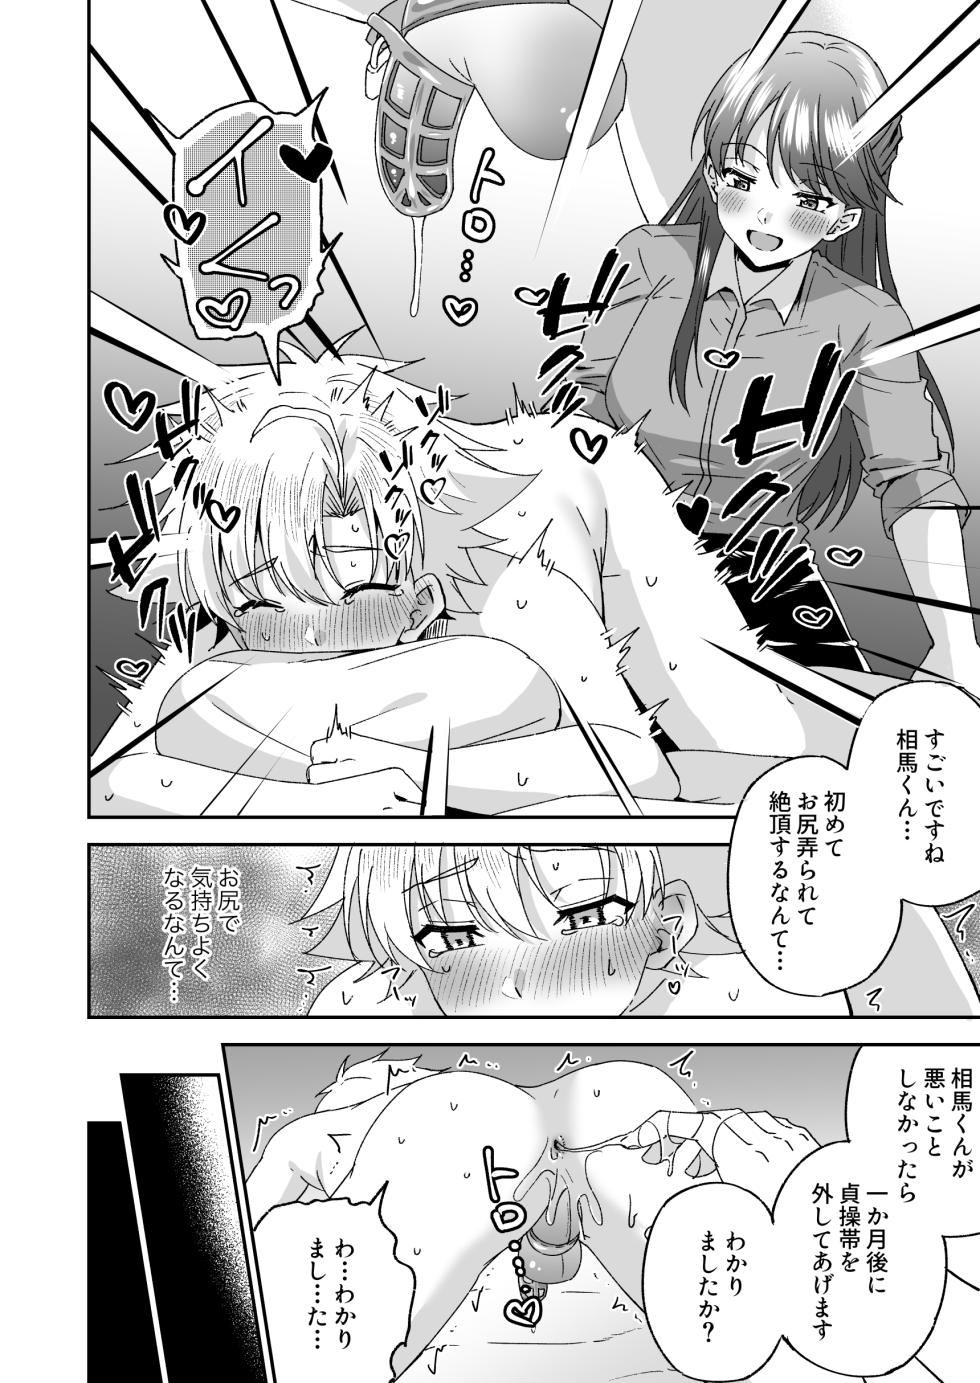 [Manga] A story about a delinquent boy who gets chastity belt ejaculation control reverse anal sex by a female teacher who is a nymphomaniac - Page 29